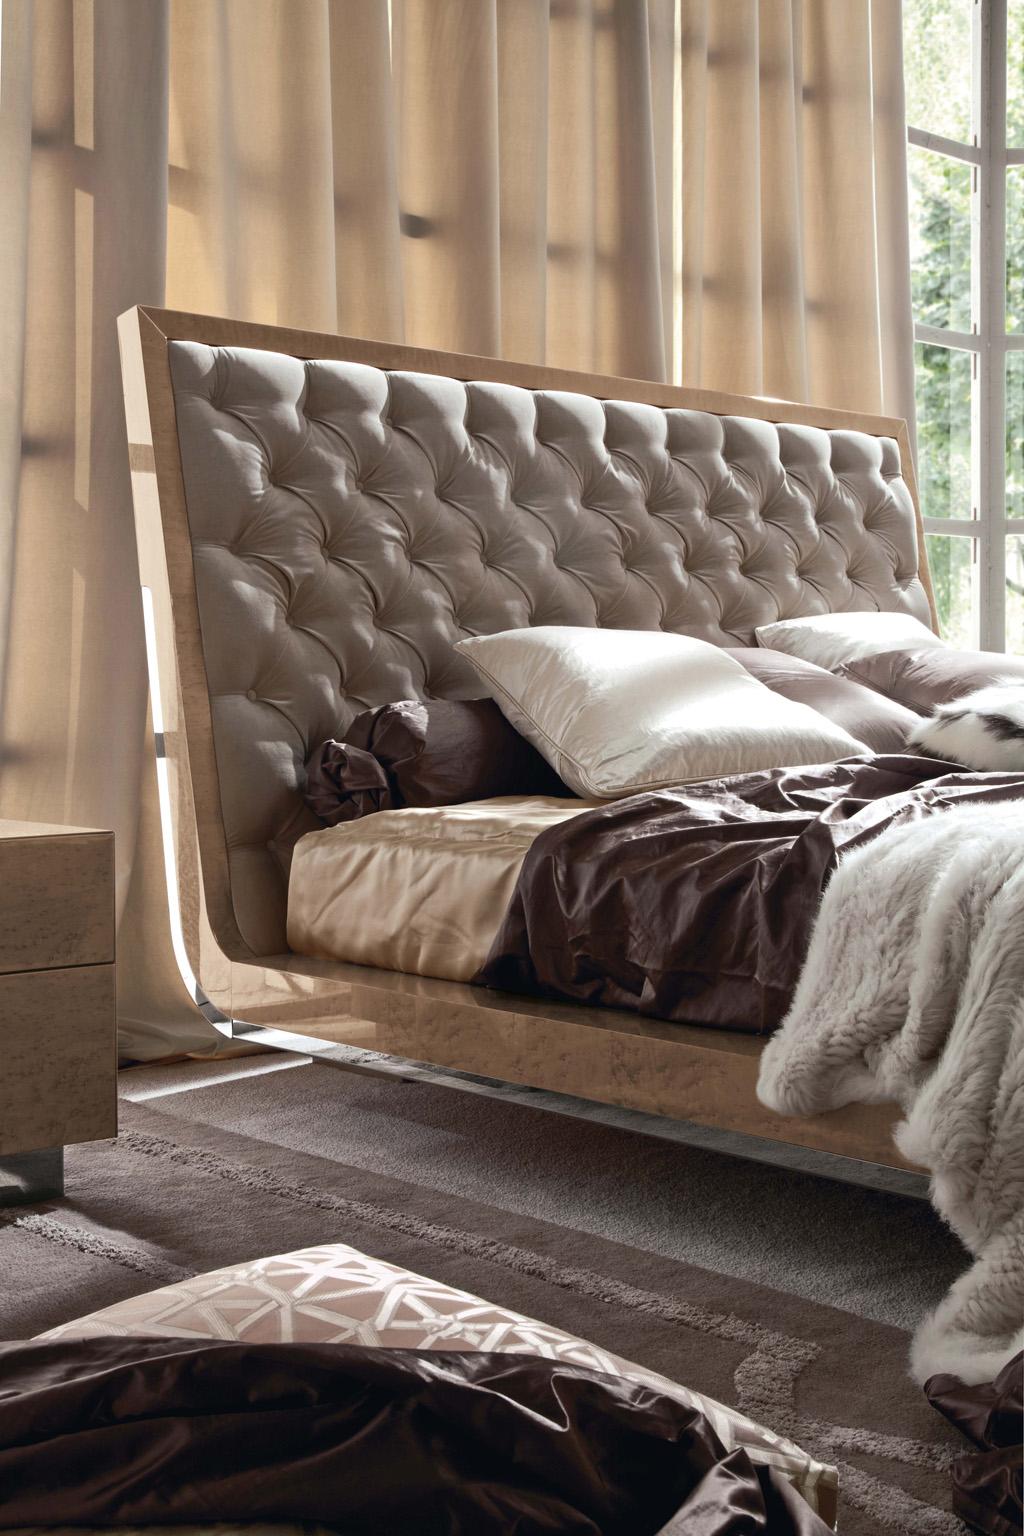 Giorgio Collection Tufted Upholstered Leather Headboard King Bed Sunrise en vente 2